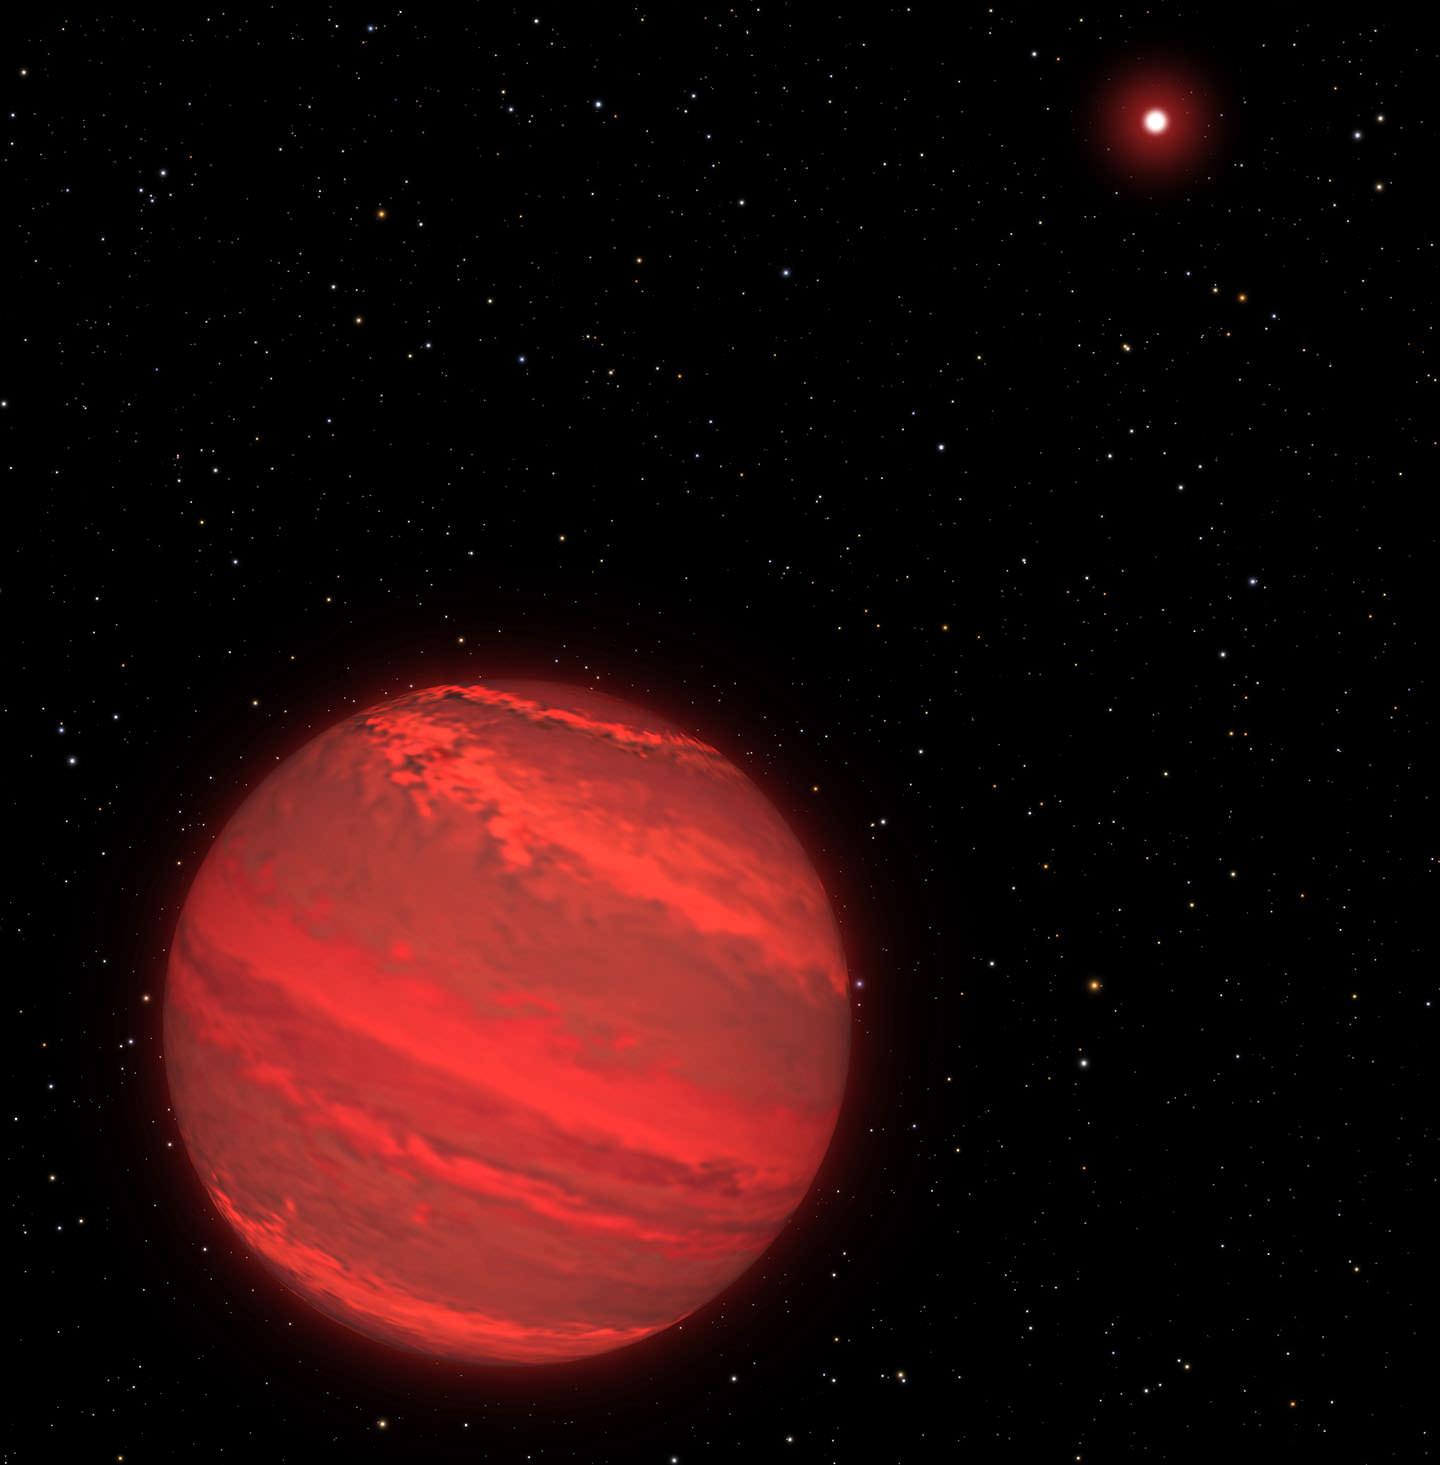 Illustration of the extrasolar planet 2M1207b (foreground) orbiting a brown dwarf. Credits: NASA, ESA, and G. Bacon/STScI